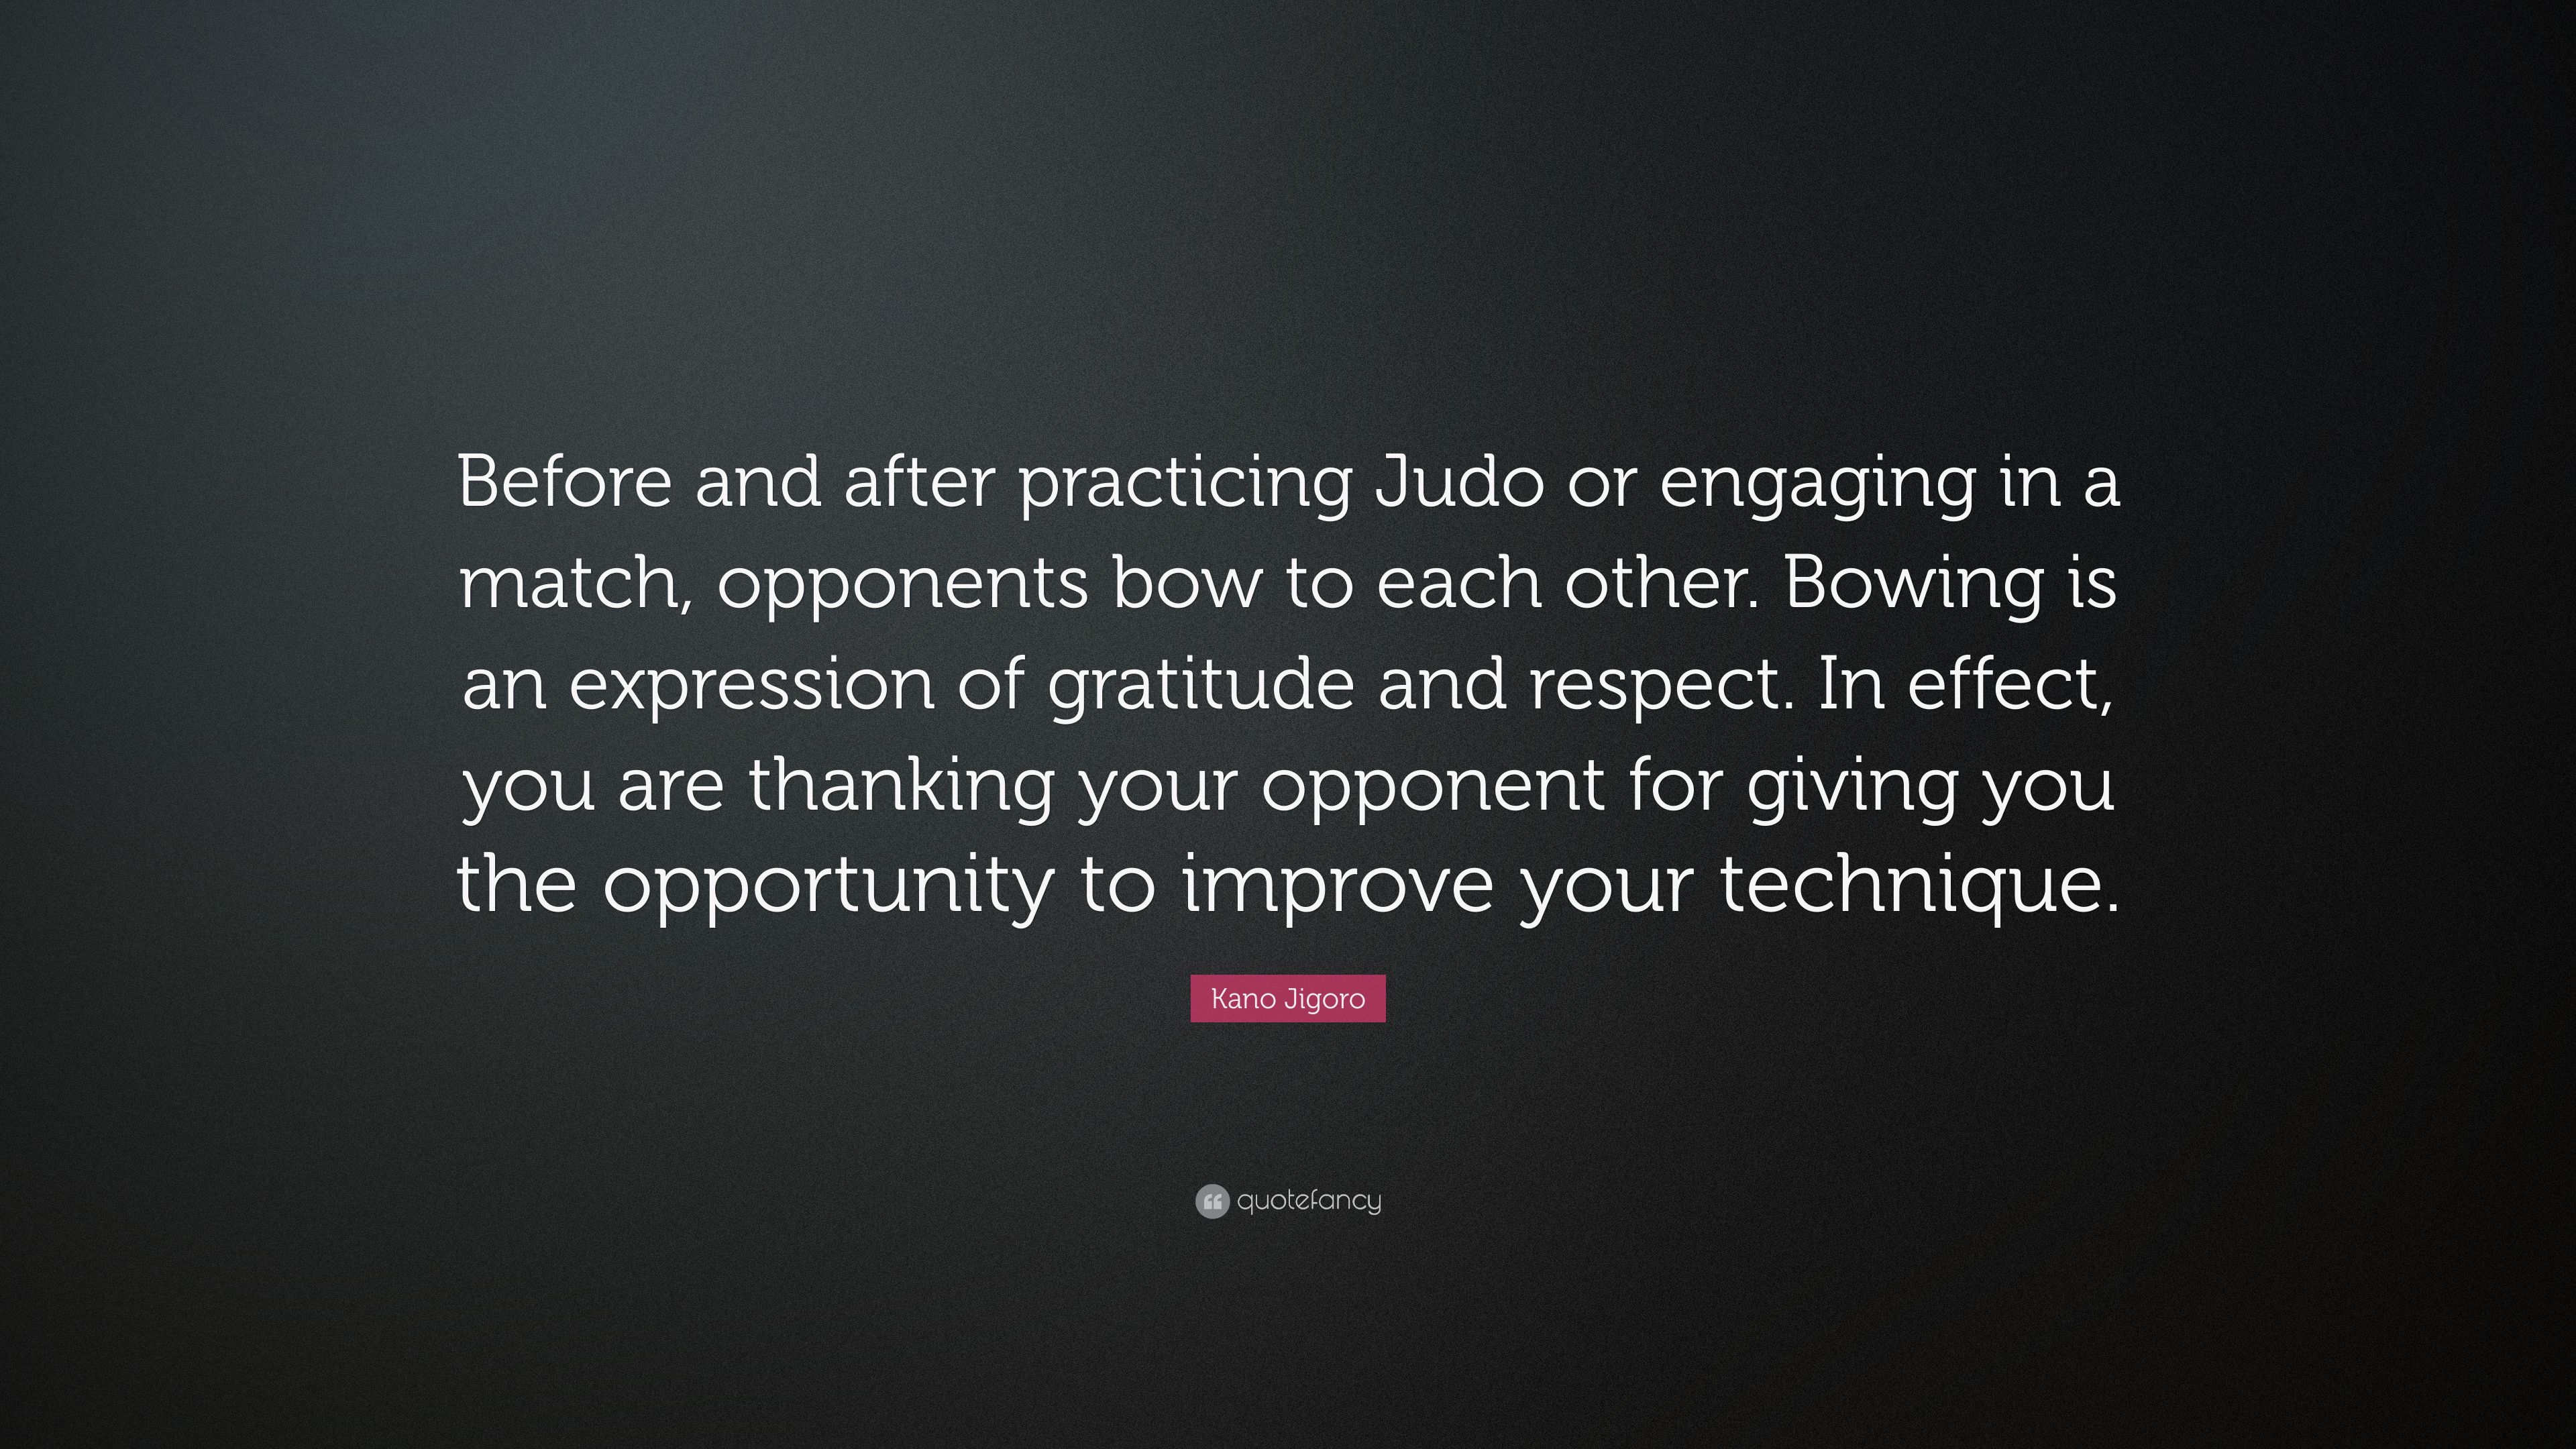 Kano Jigoro Quote: “Before and after practicing Judo or engaging